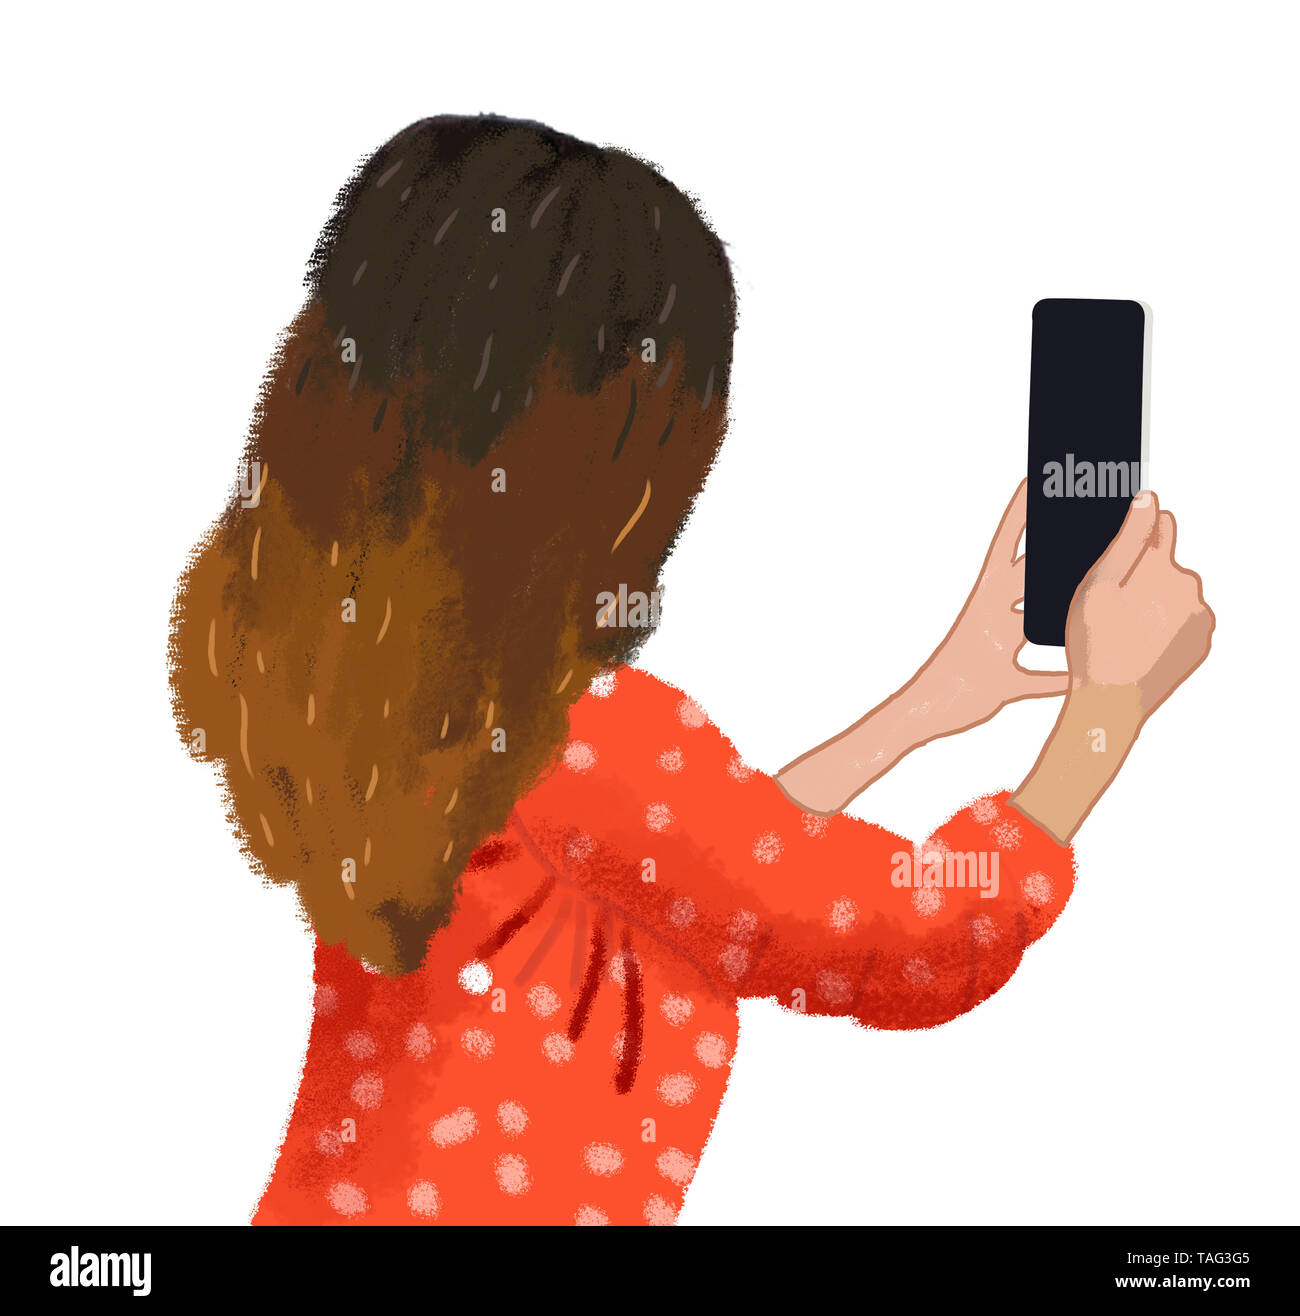 cell phone selfie Stock Photo